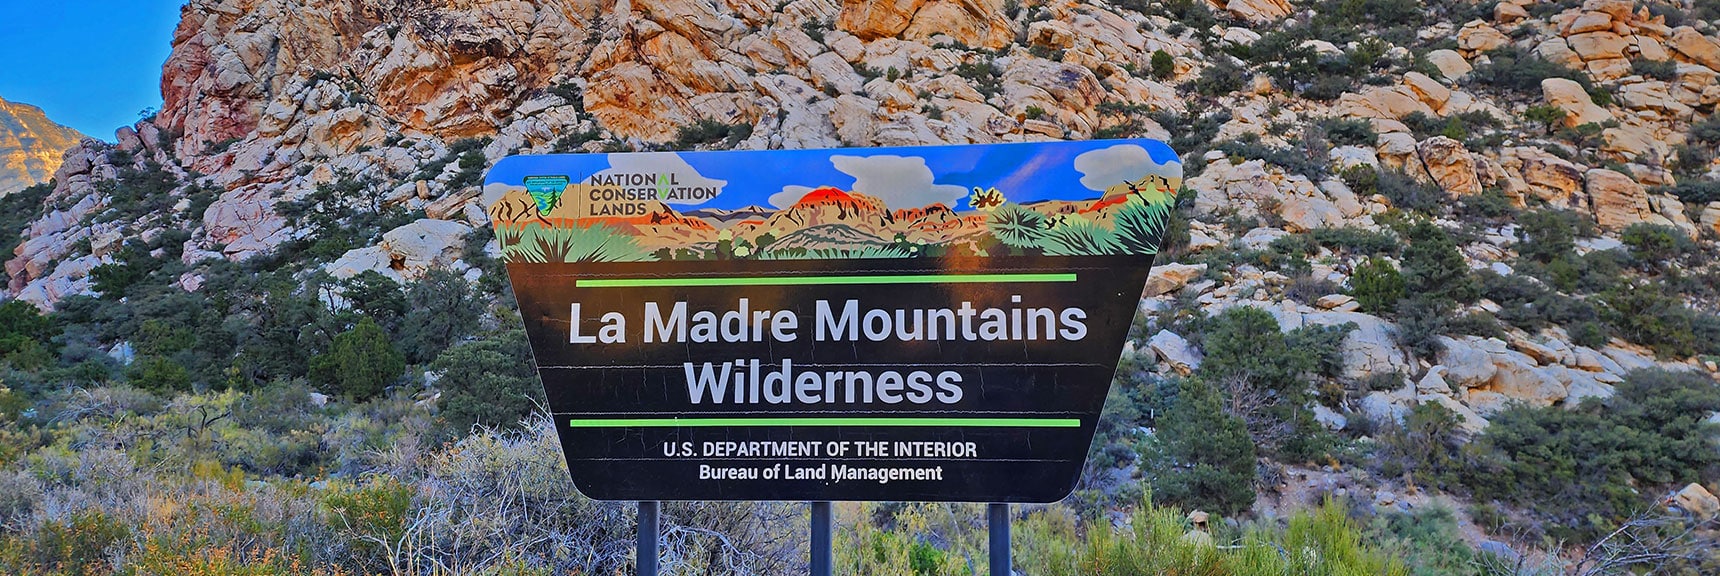 Enter La Madre Mts Wilderness as You Round West Side of White Rock Mt | Keystone Thrust West Summit Above White Rock Mountain | La Madre Mountains Wilderness, Nevada